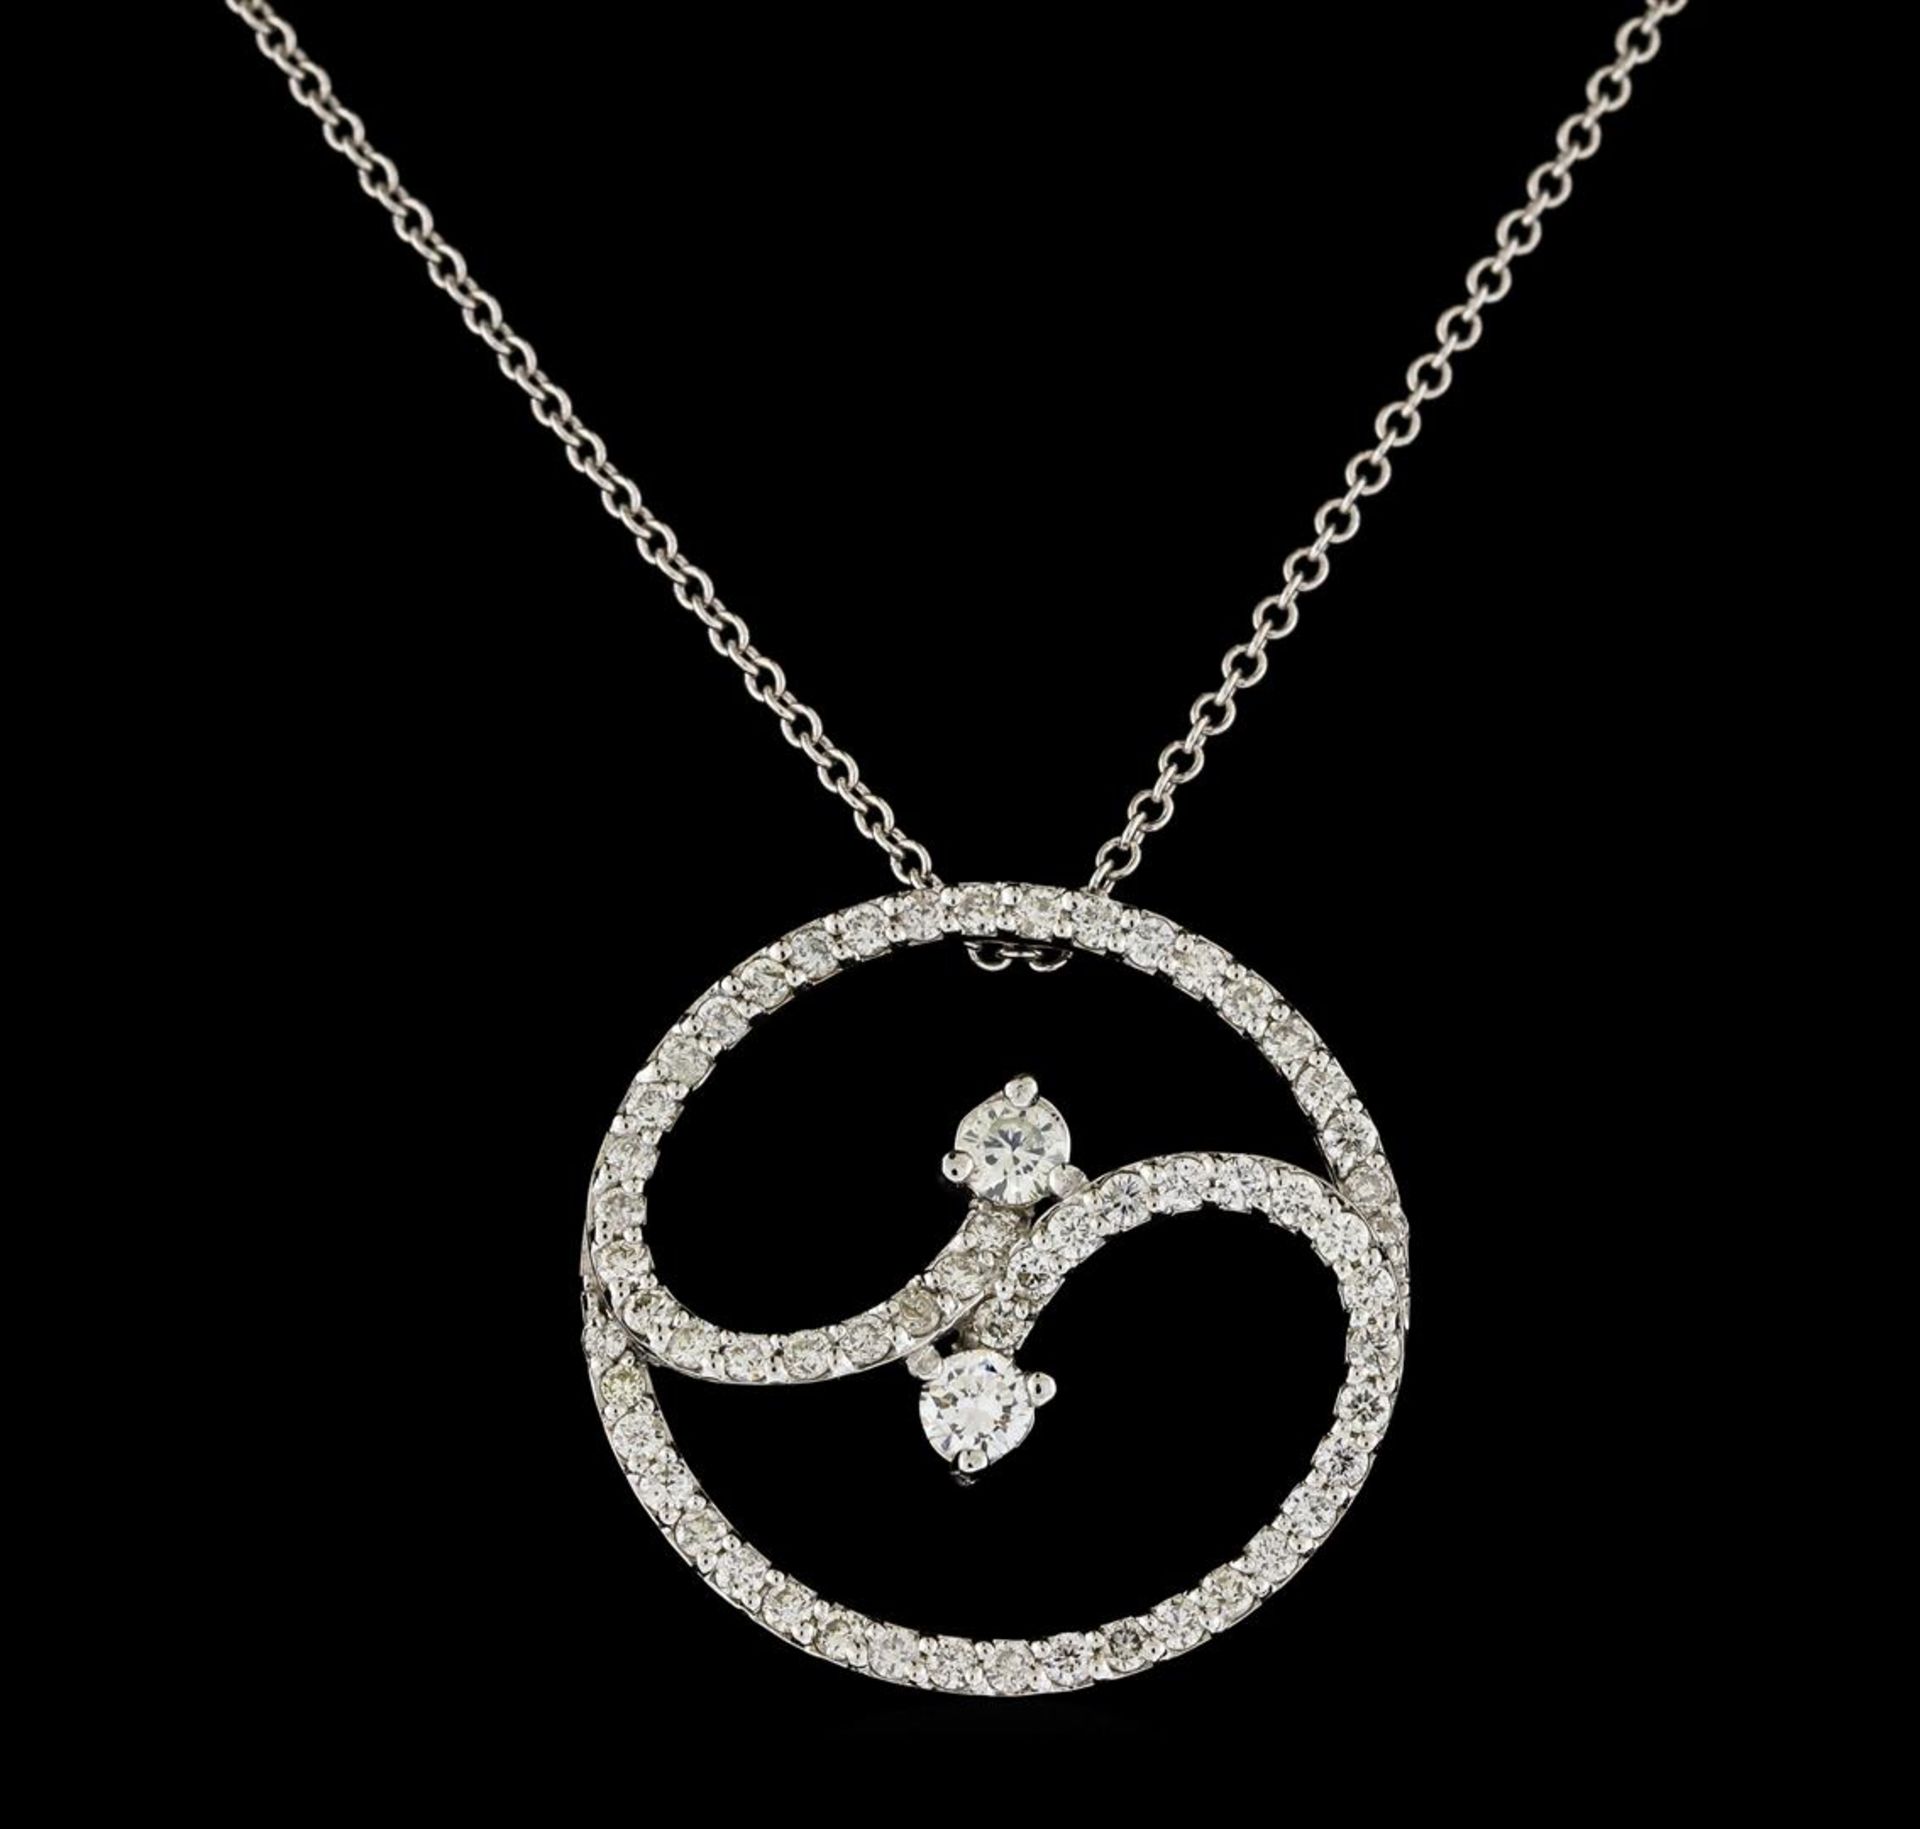 0.88 ctw Diamond Pendant With Chain - 14KT White Gold - Image 2 of 2